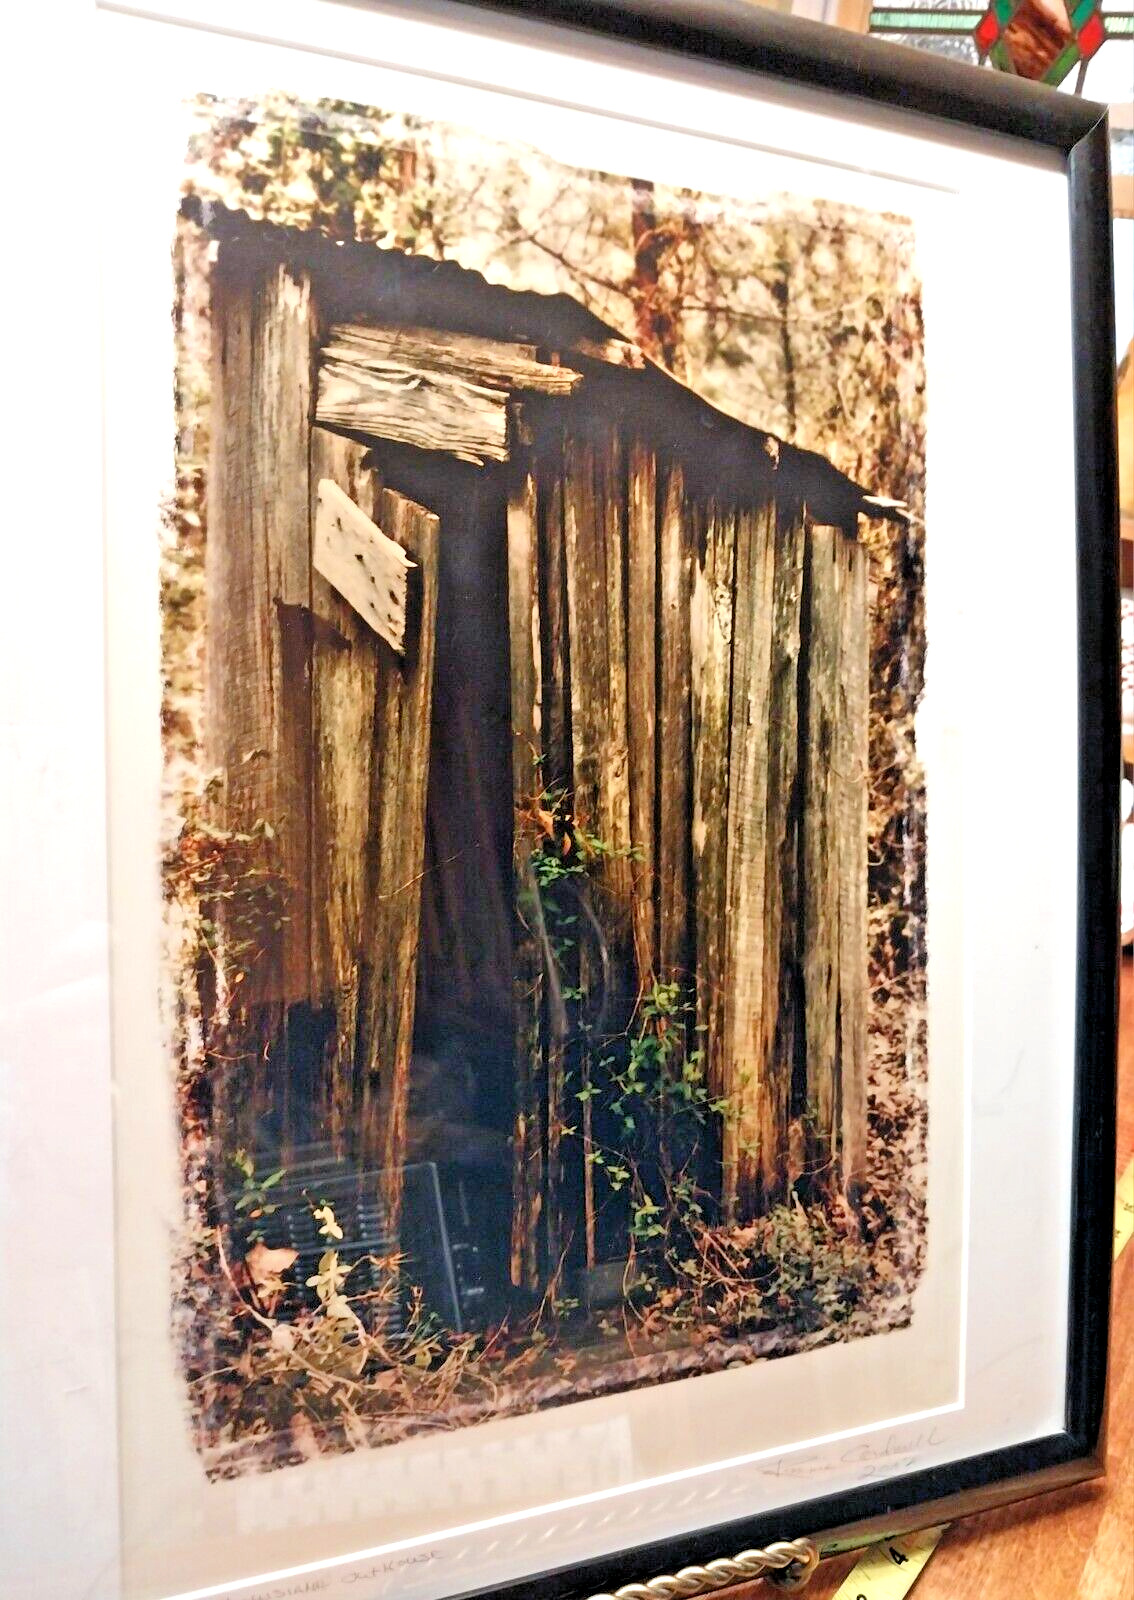 Framed Photograph Louisiana Distressed Outhouse Signed by Artist  1/50  Edition